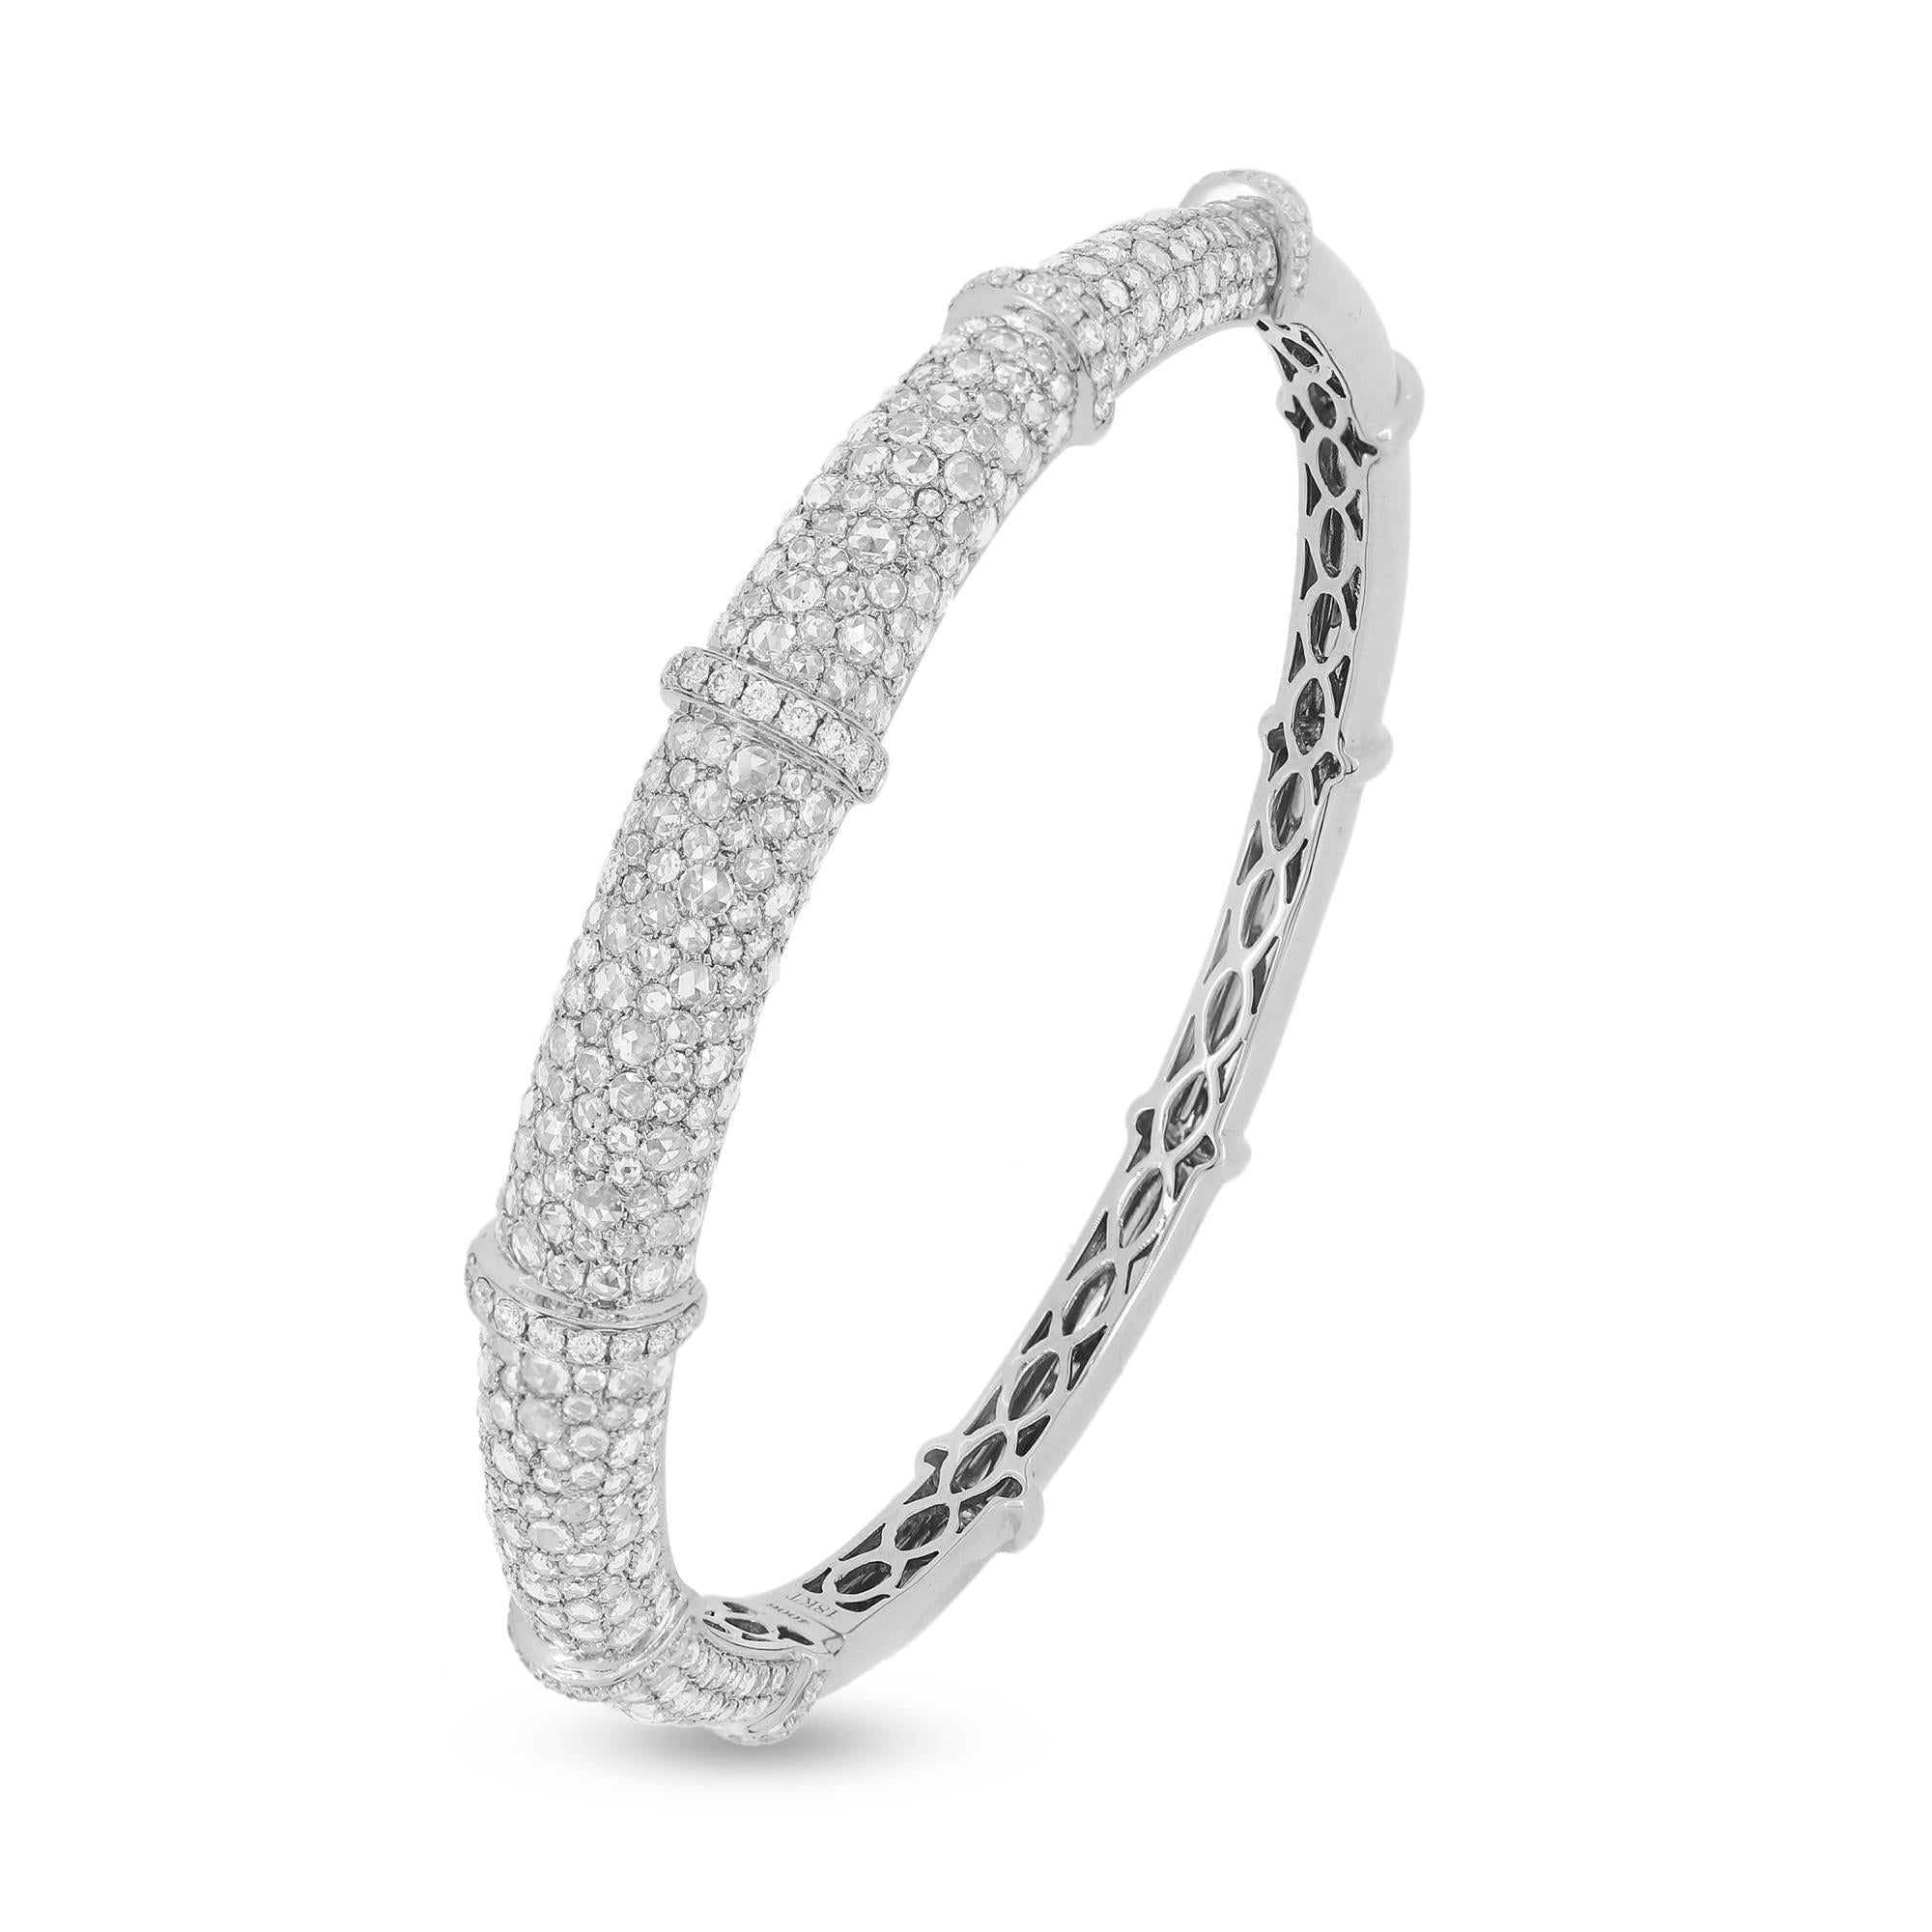 The Nigaam 5.21 Cttw. Round Brilliant Cut Diamond Bangle Bracelet is a stunning piece of jewelry crafted in 18K white gold. The front of the bracelet boasts round pave set diamonds on the body, adding a touch of sparkle and glamour to any outfit.